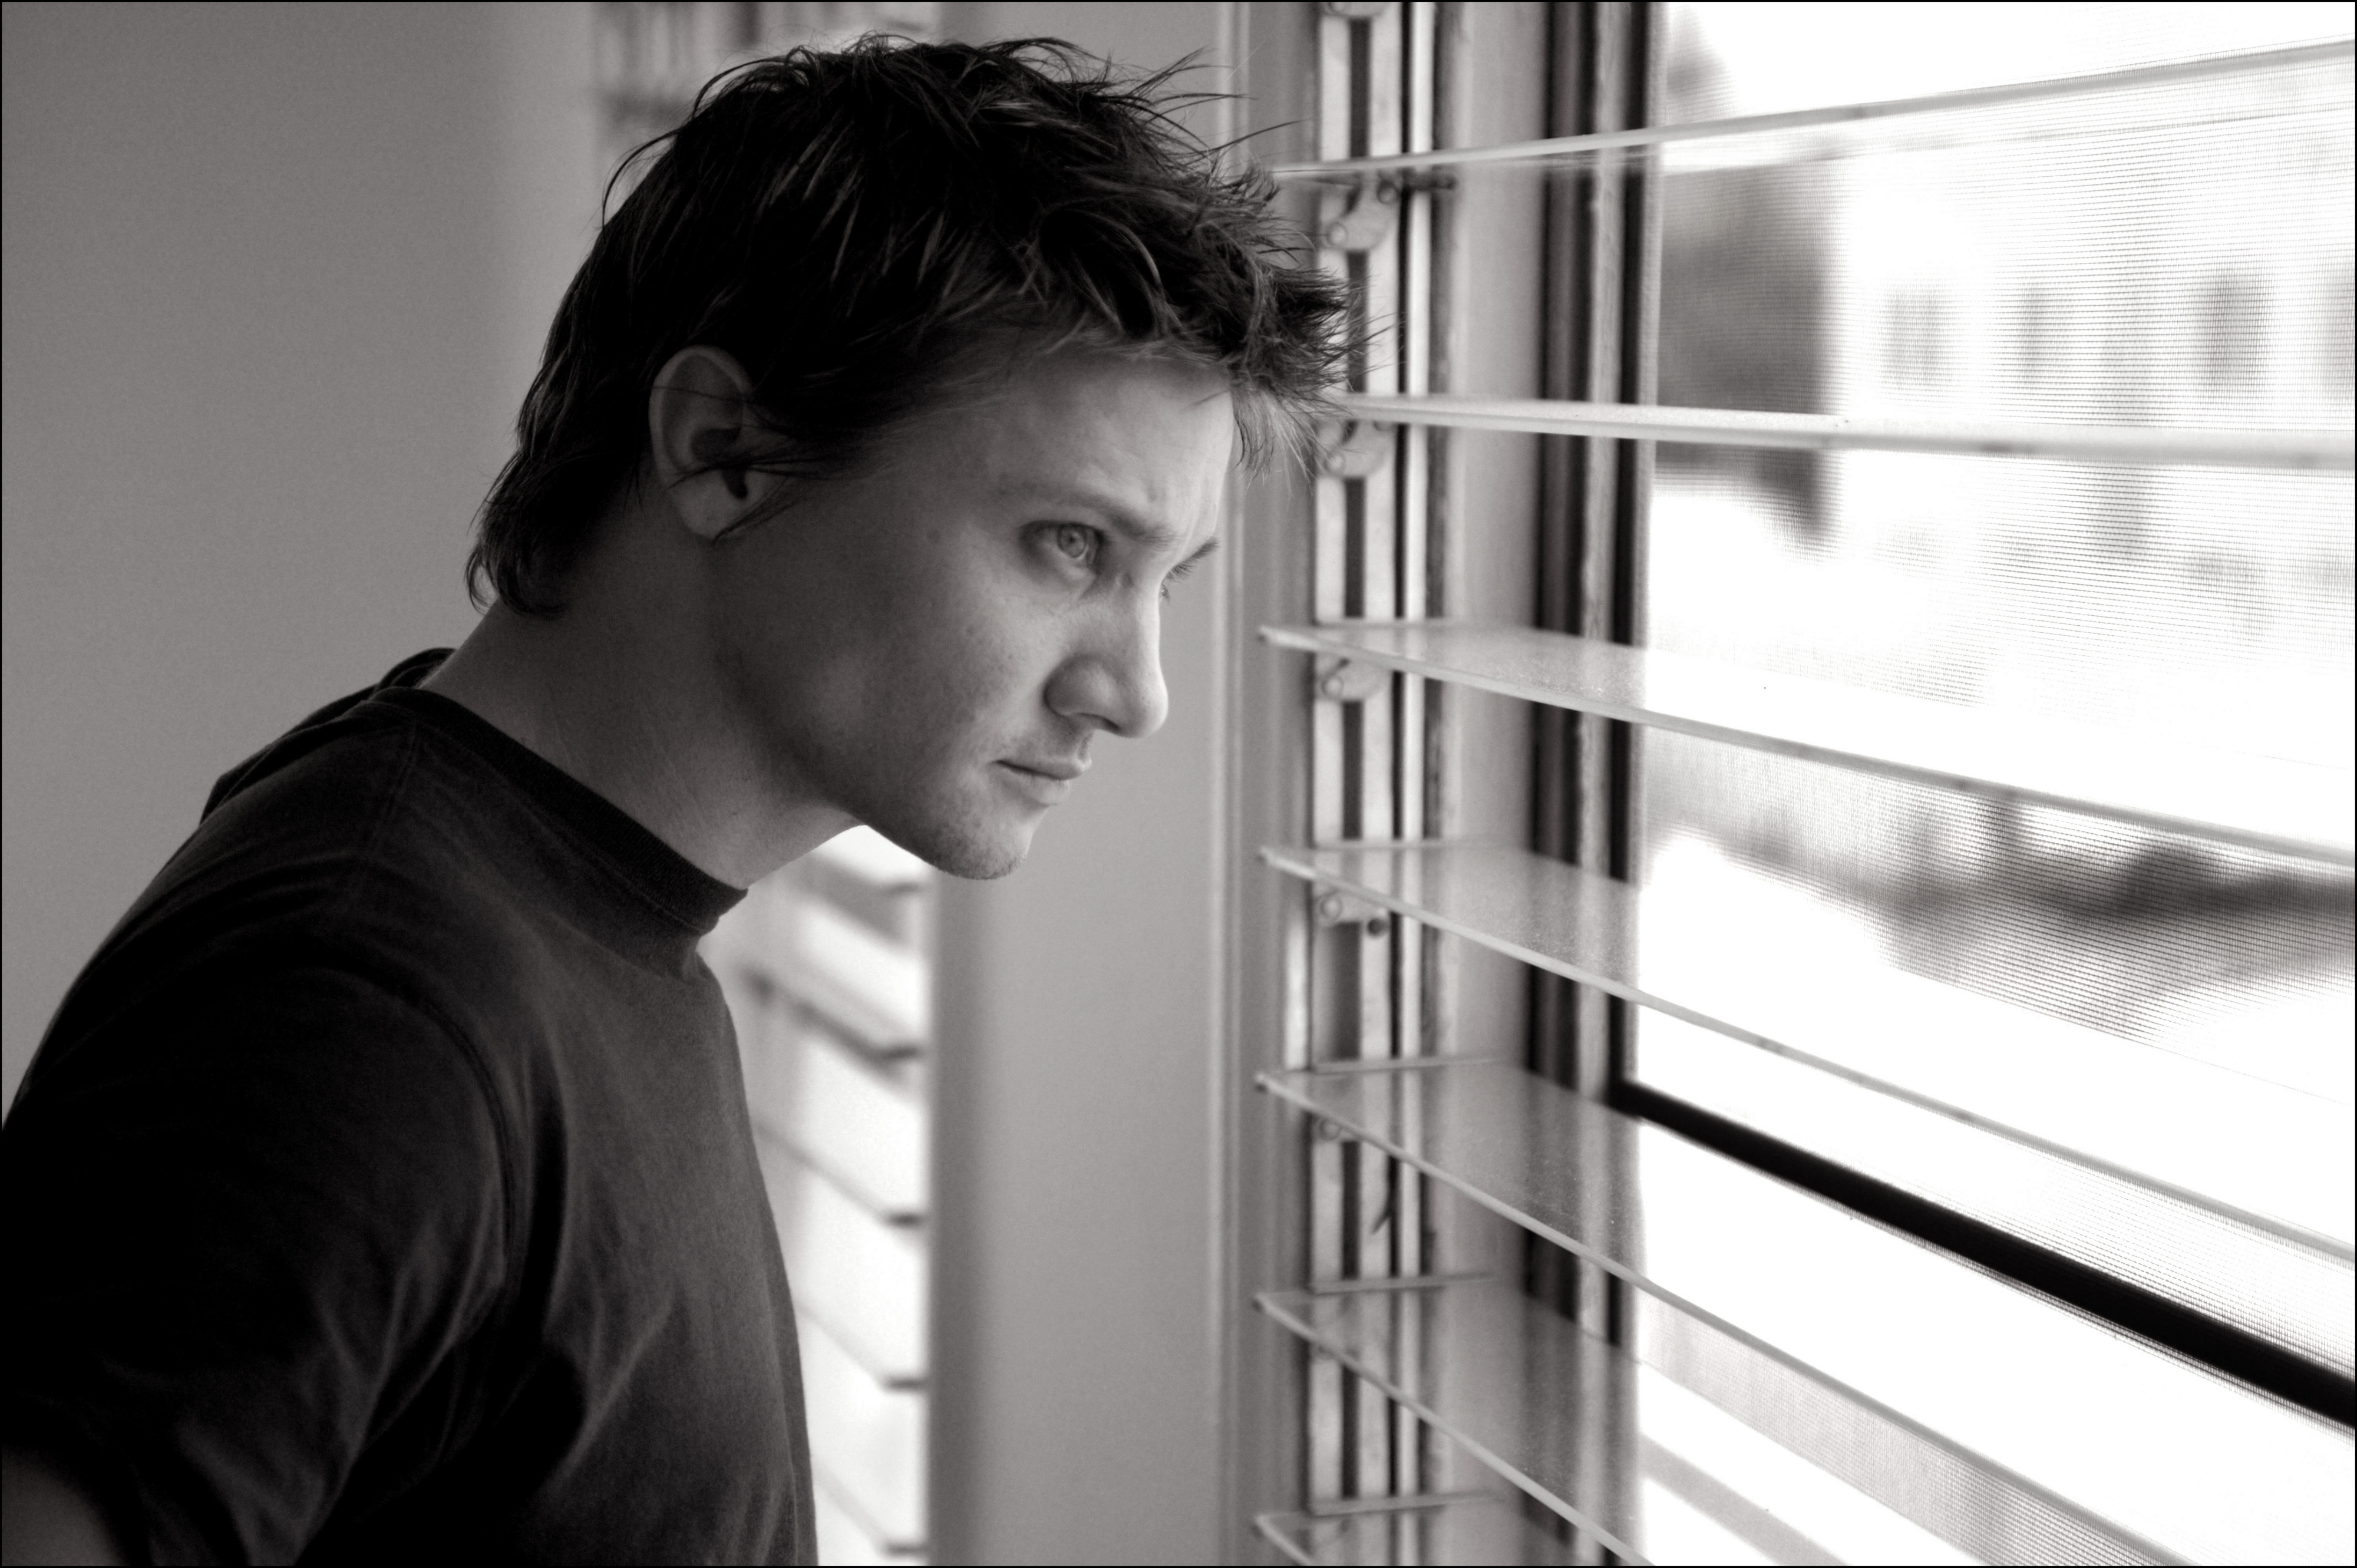 Jeremy Renner Images Wallpapers